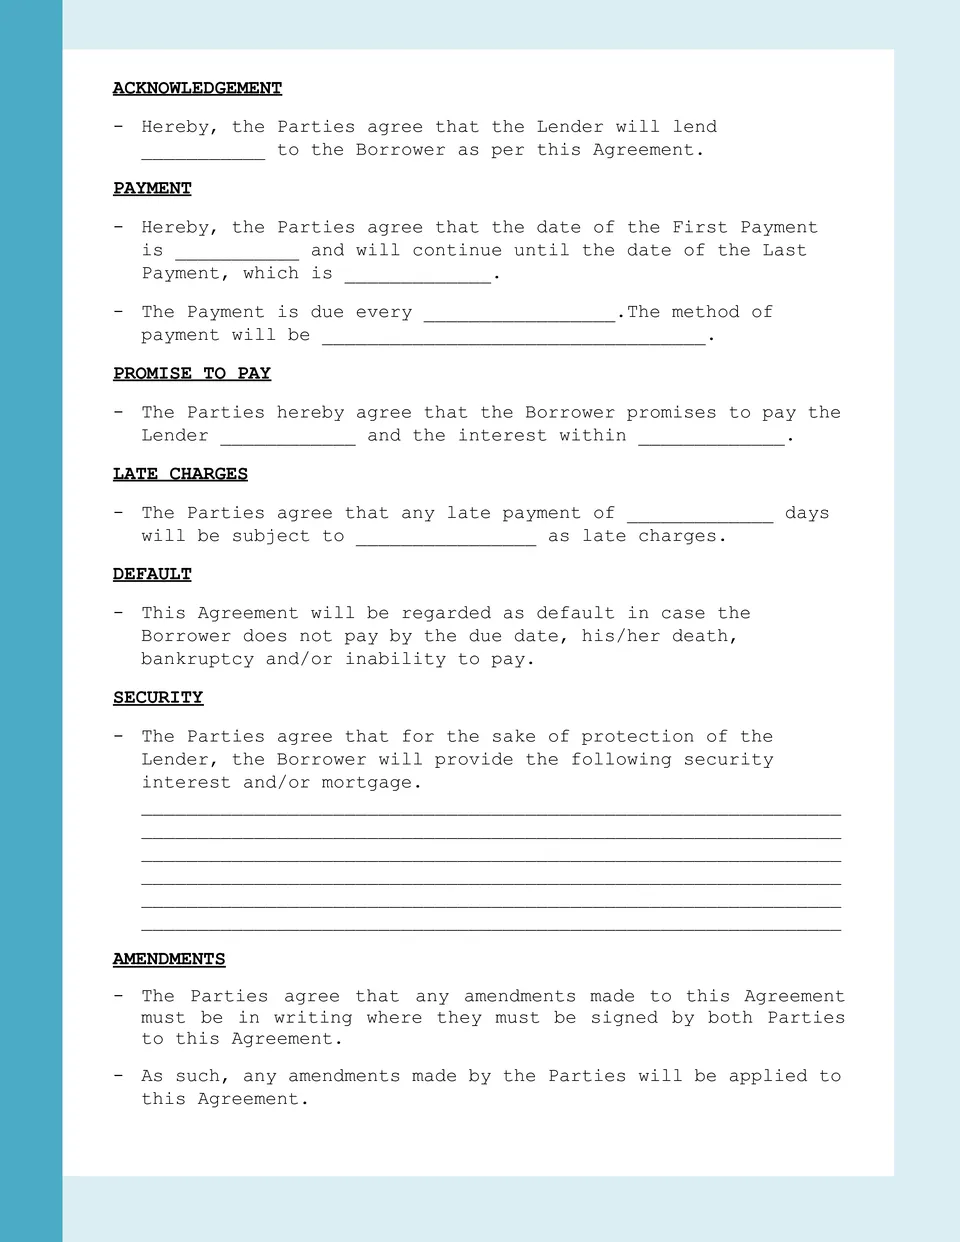 Loan Agreement Template Page 2